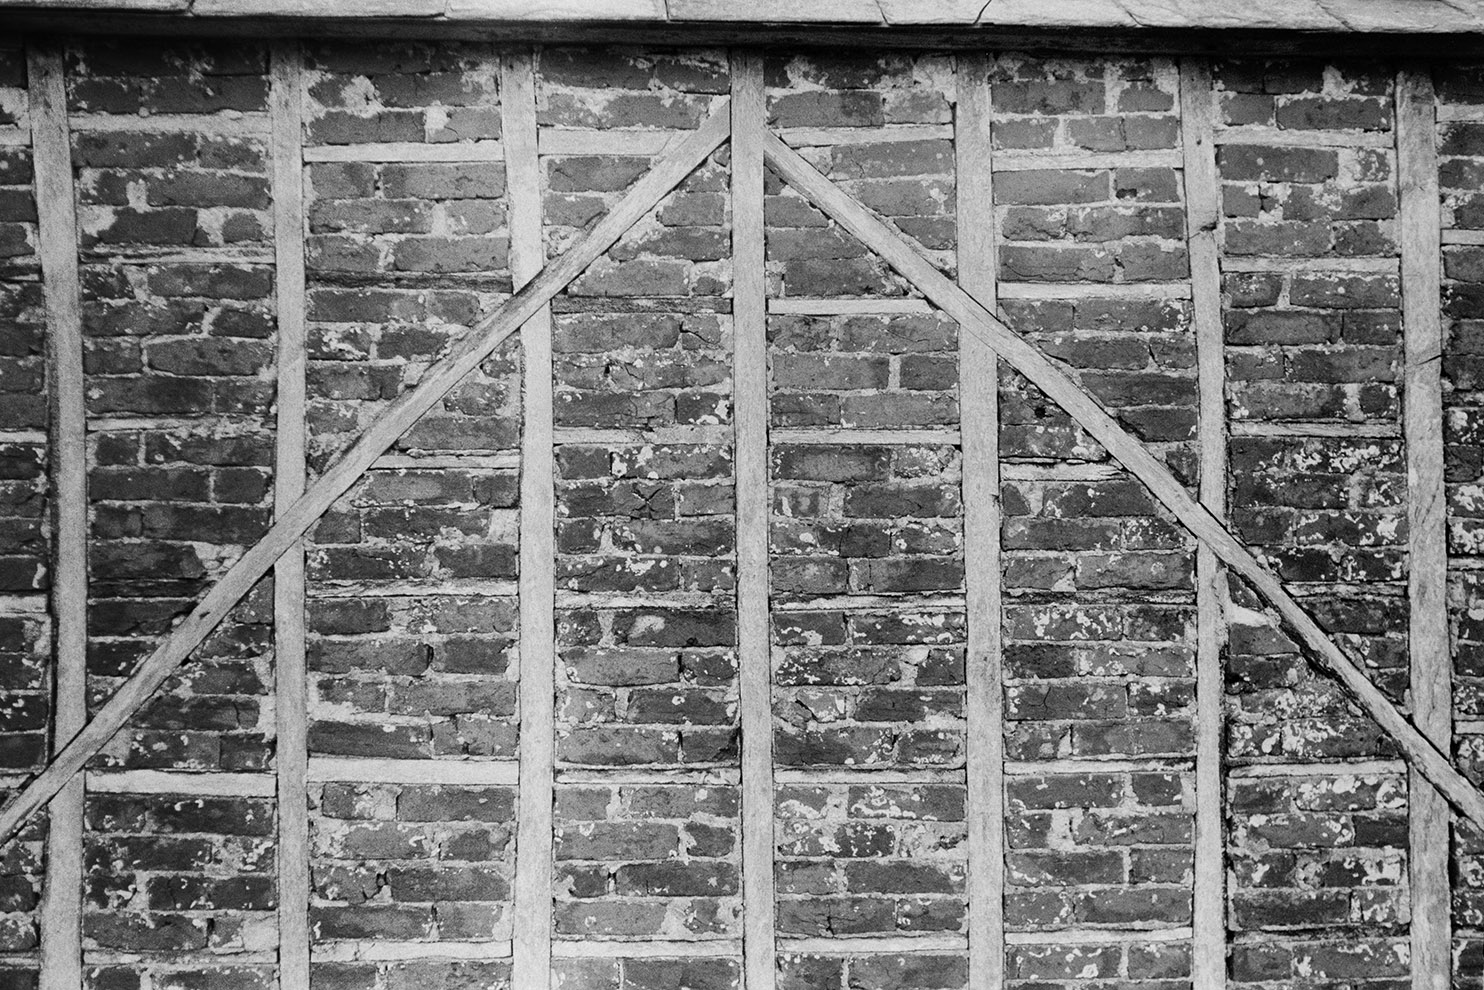 A close up view of a wall with a brick and timber construction, at Arlington.